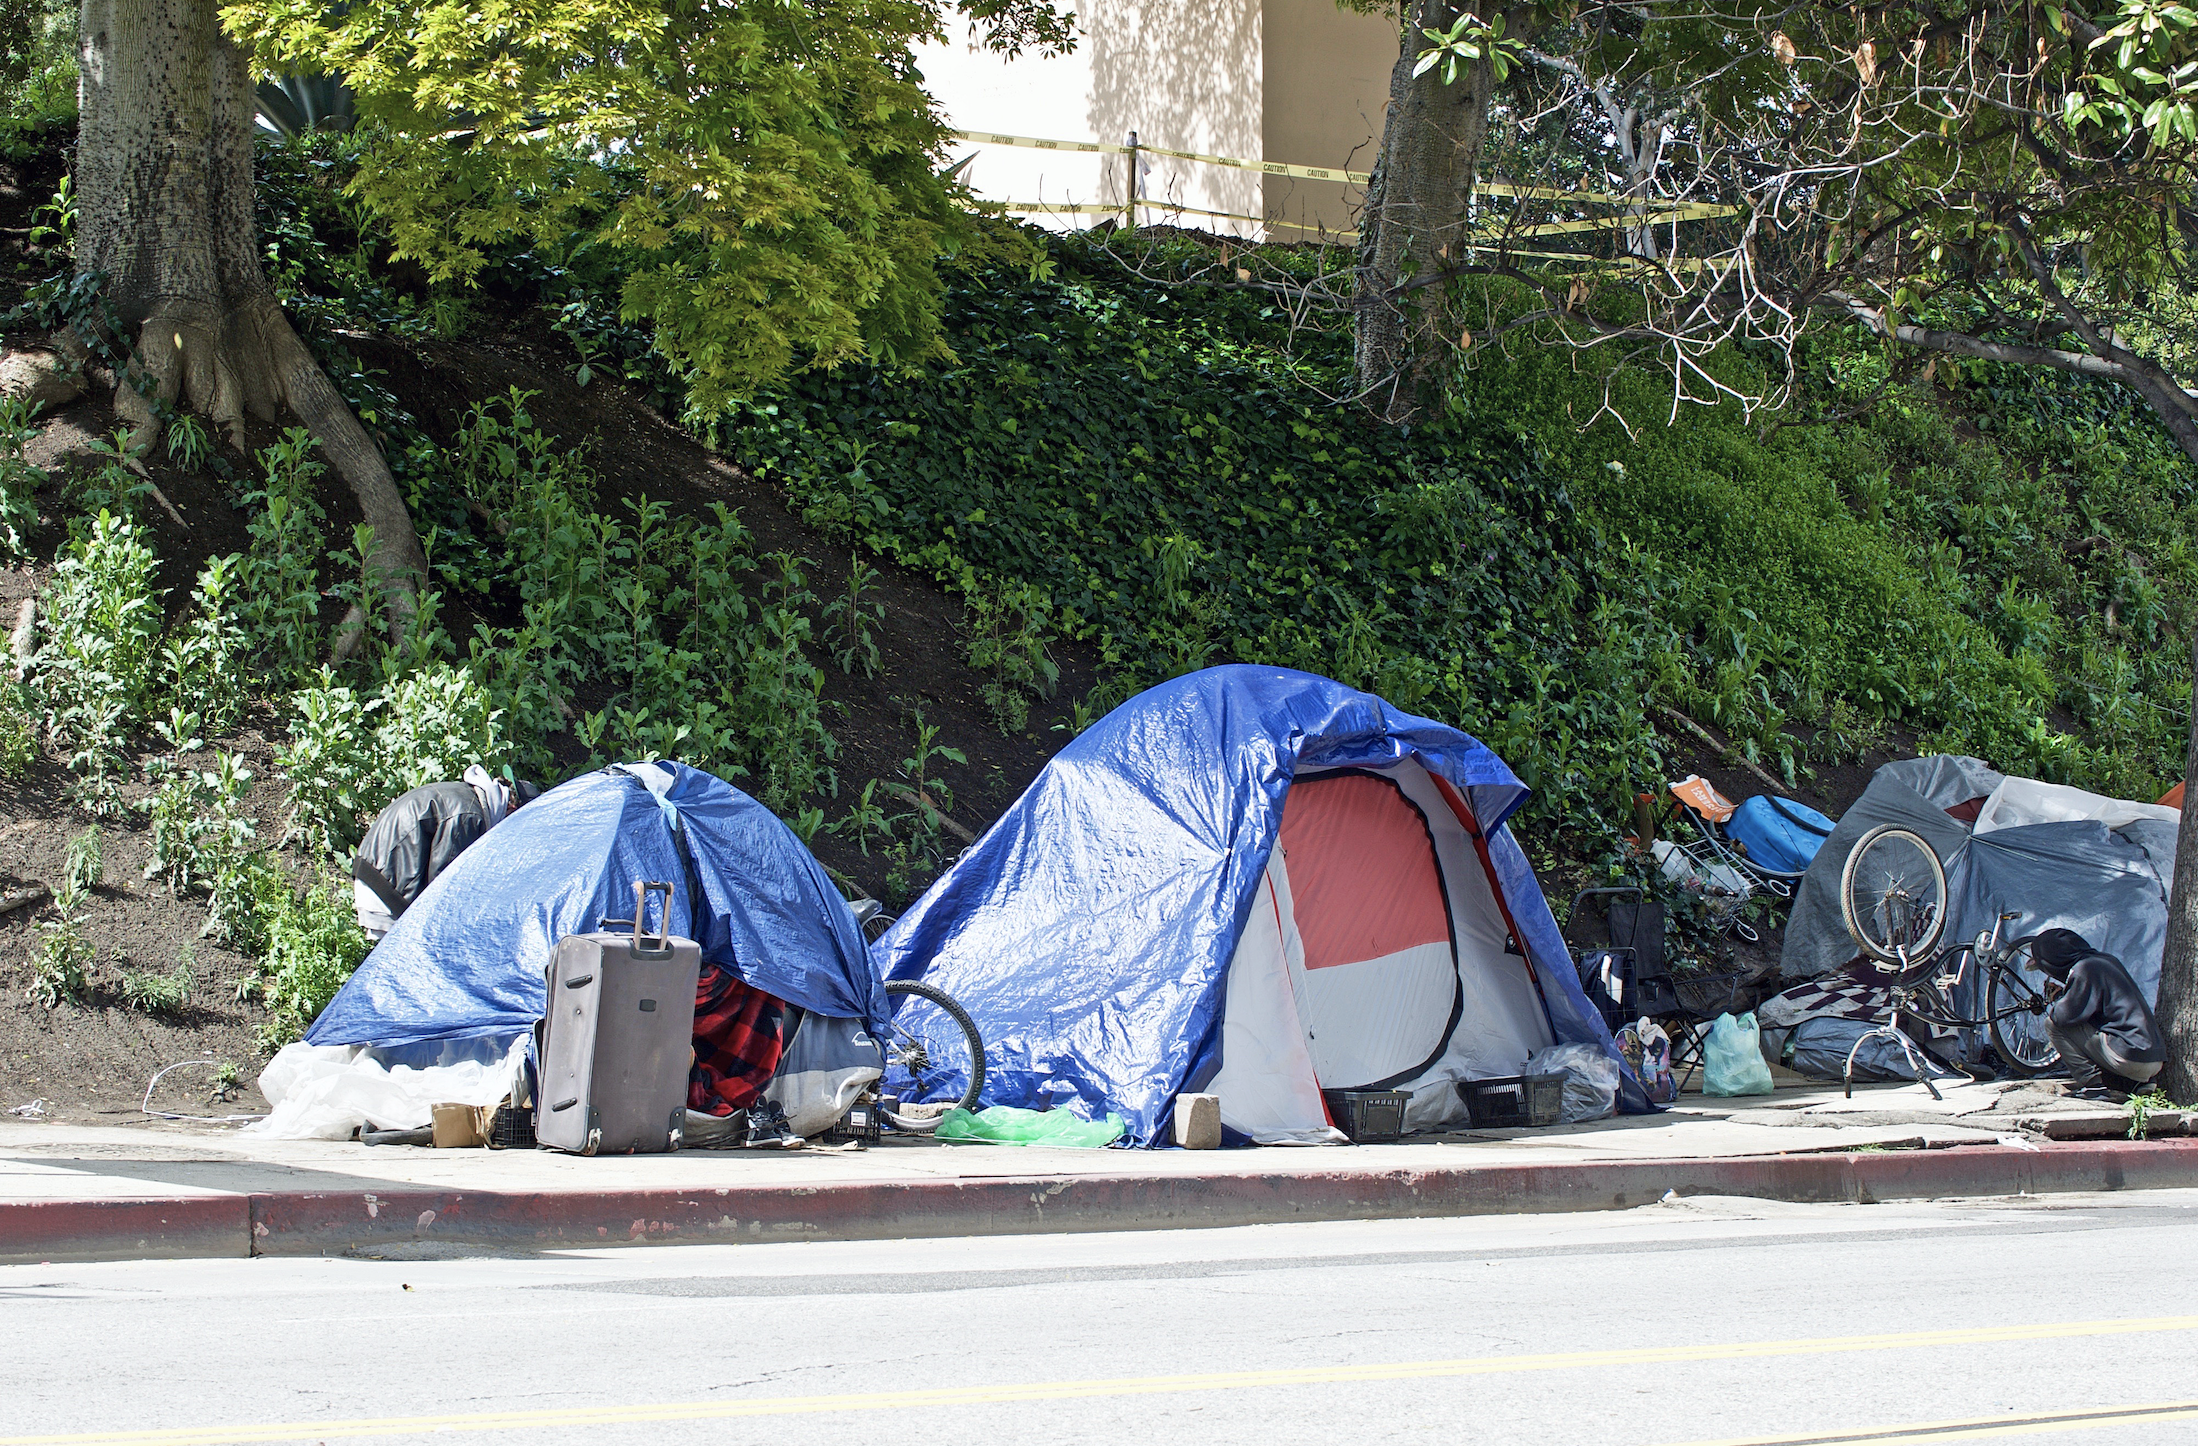 Homeless encampments along a Los Angeles roadside on April 8, depicting the growing epidemic of homelessness amid the worldwide COVID-19 pandemic. Image by Philip Pilosian/Shutterstock. United States, 2020.